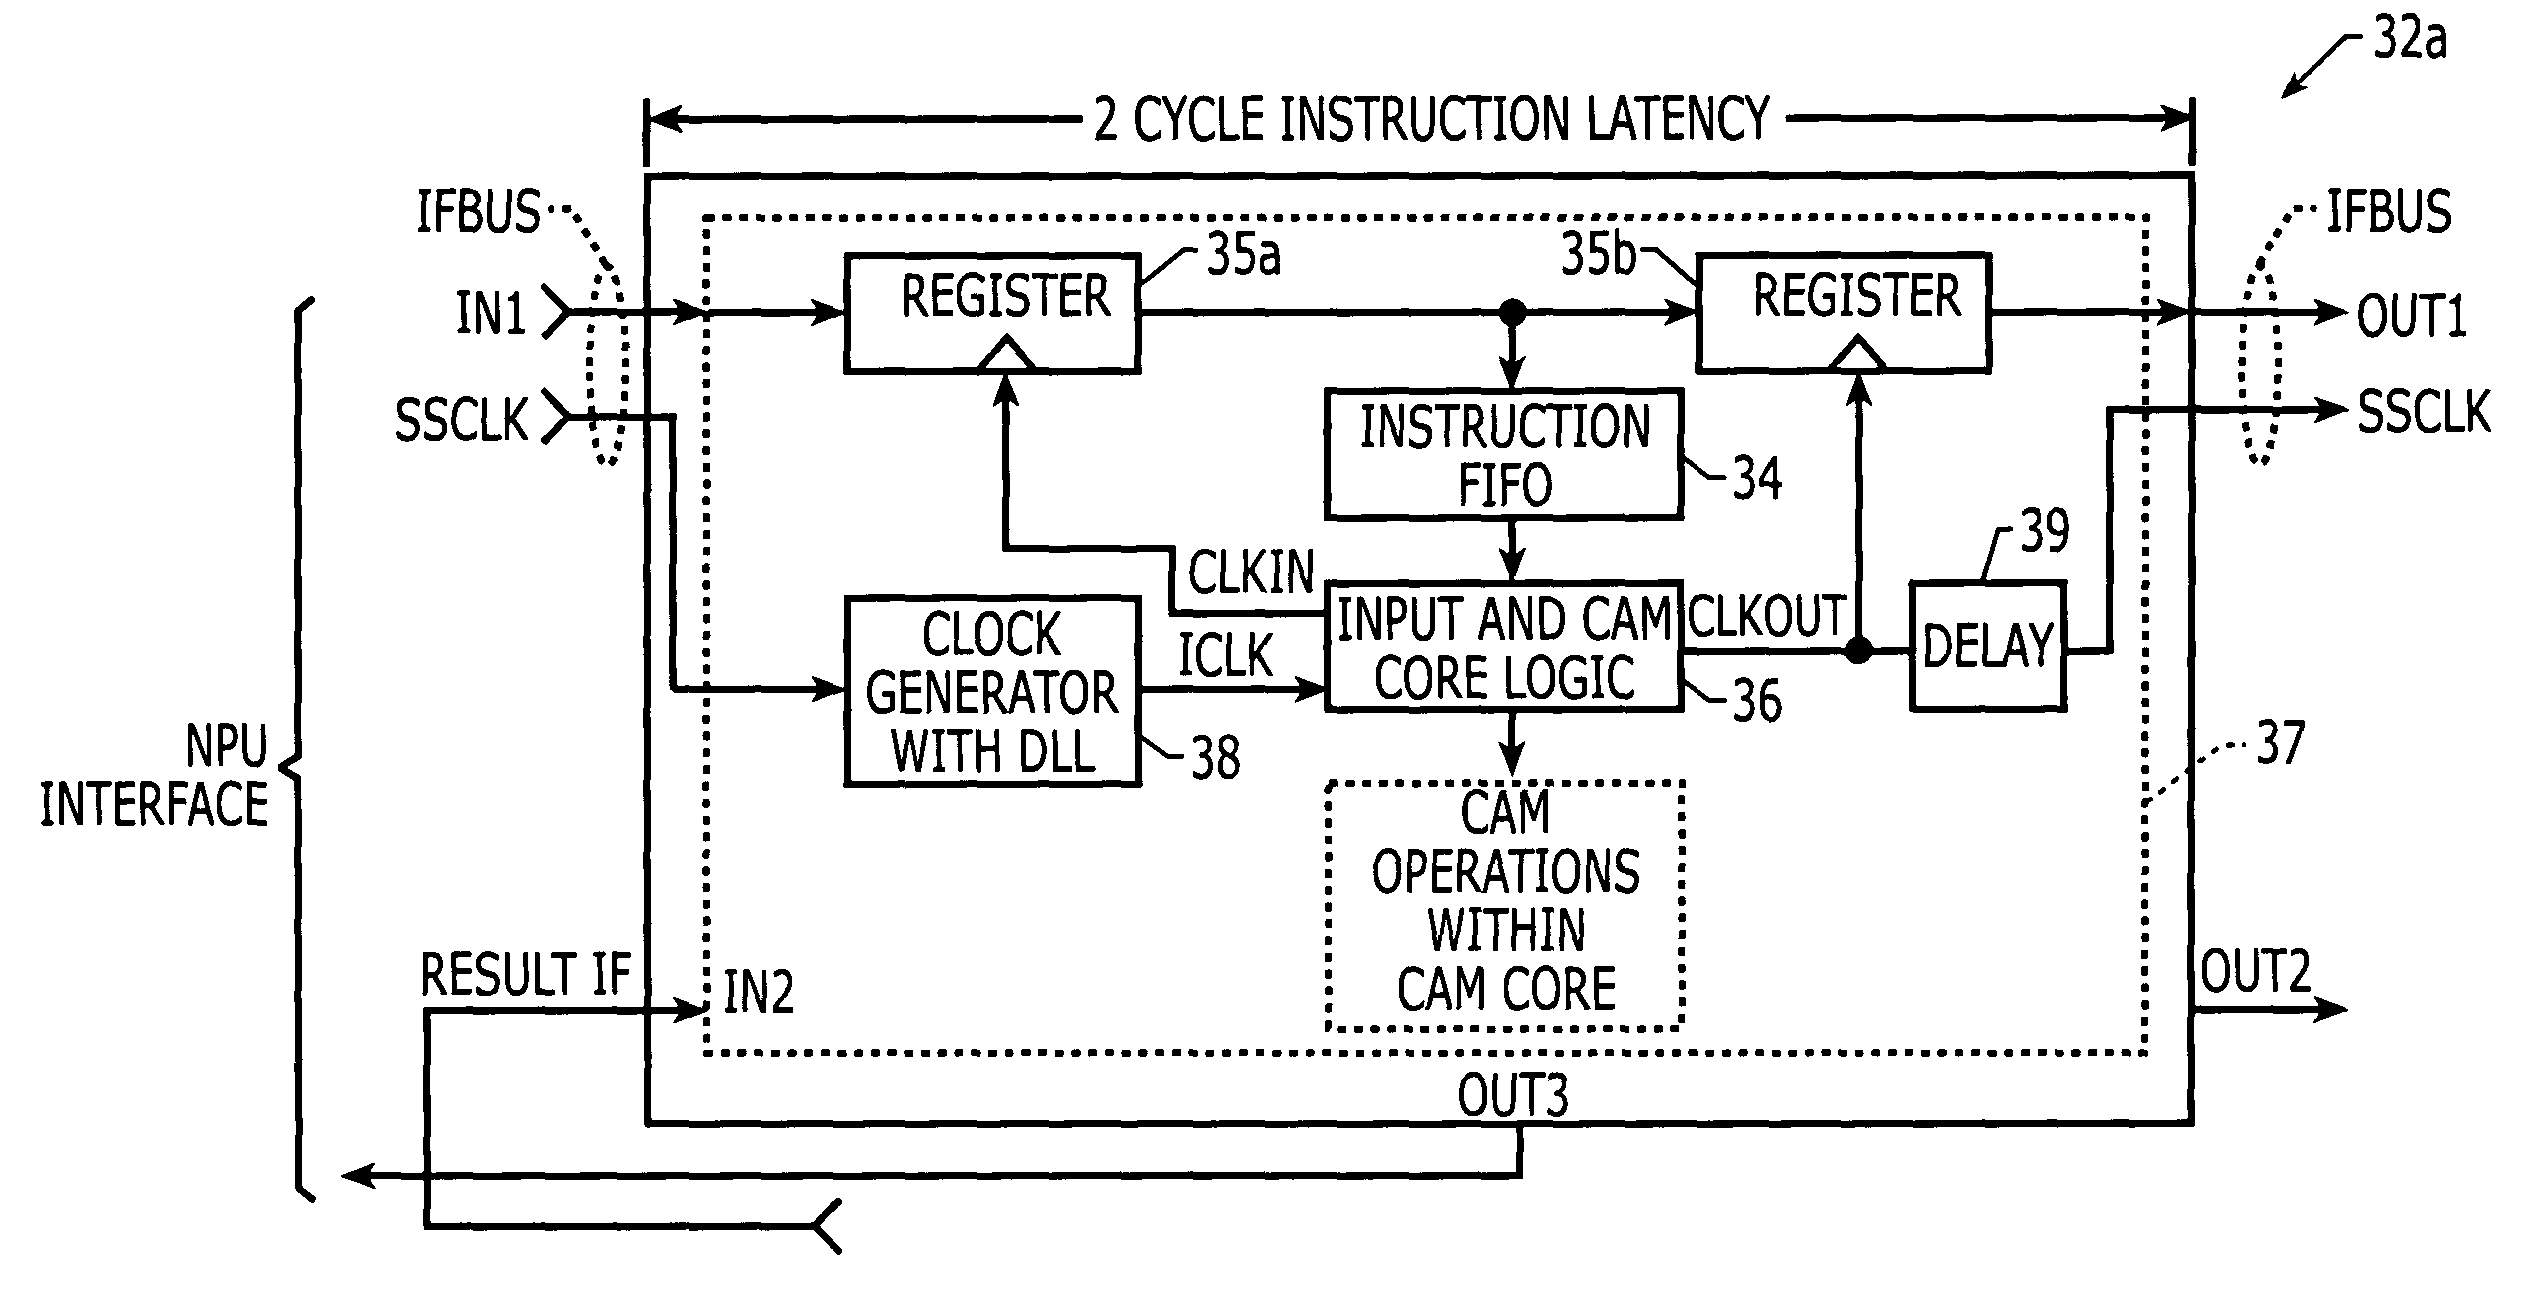 Content addressable memory (CAM) devices that support distributed CAM control and methods of operating same